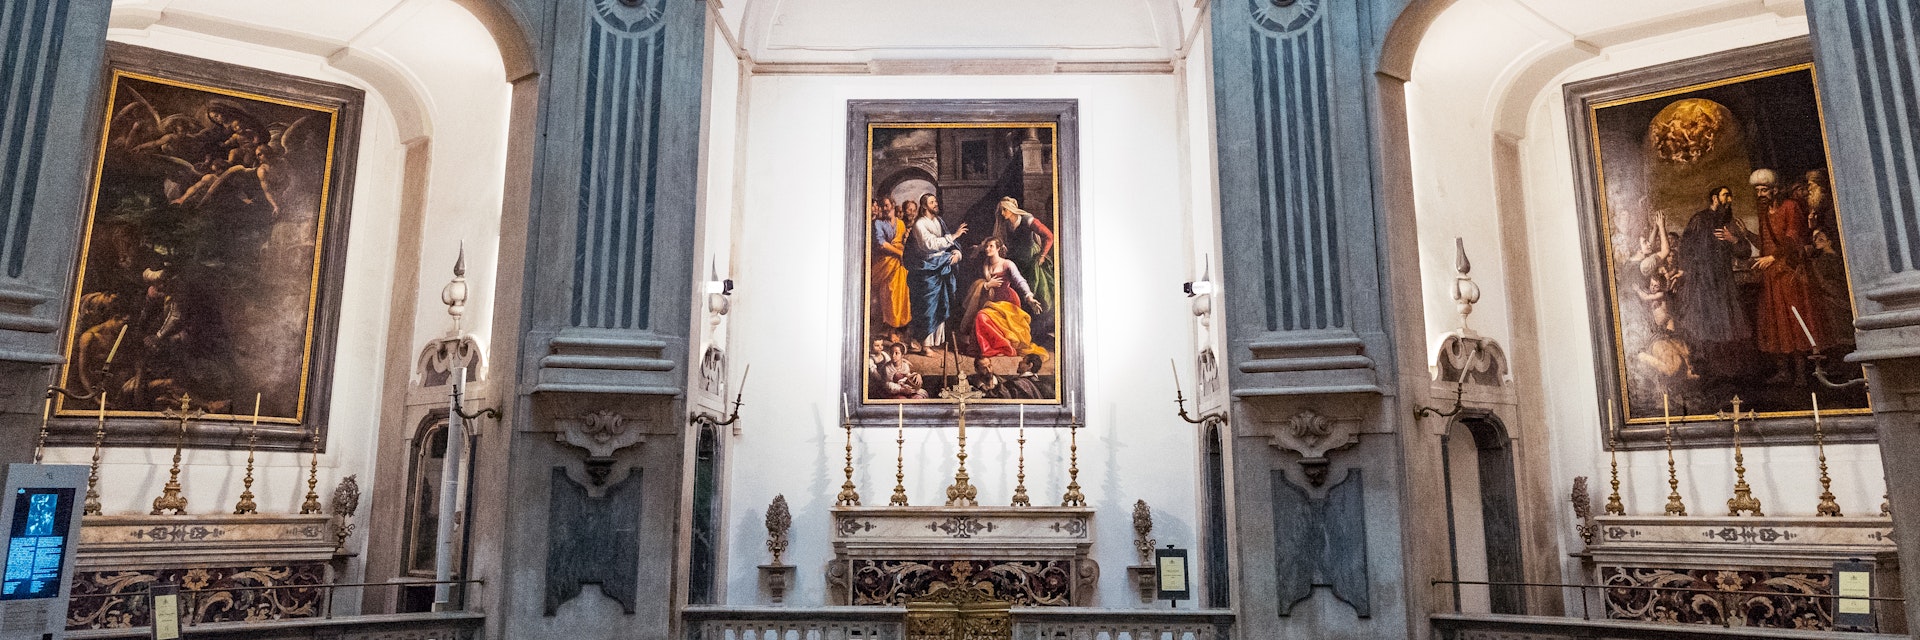 Naples, Italy - August 4, 2015:  The octagonal baroque  Pio Monte Della Misericordia church; Shutterstock ID 591080708; purchase_order: 65050; job: poi; client: ; other:
591080708